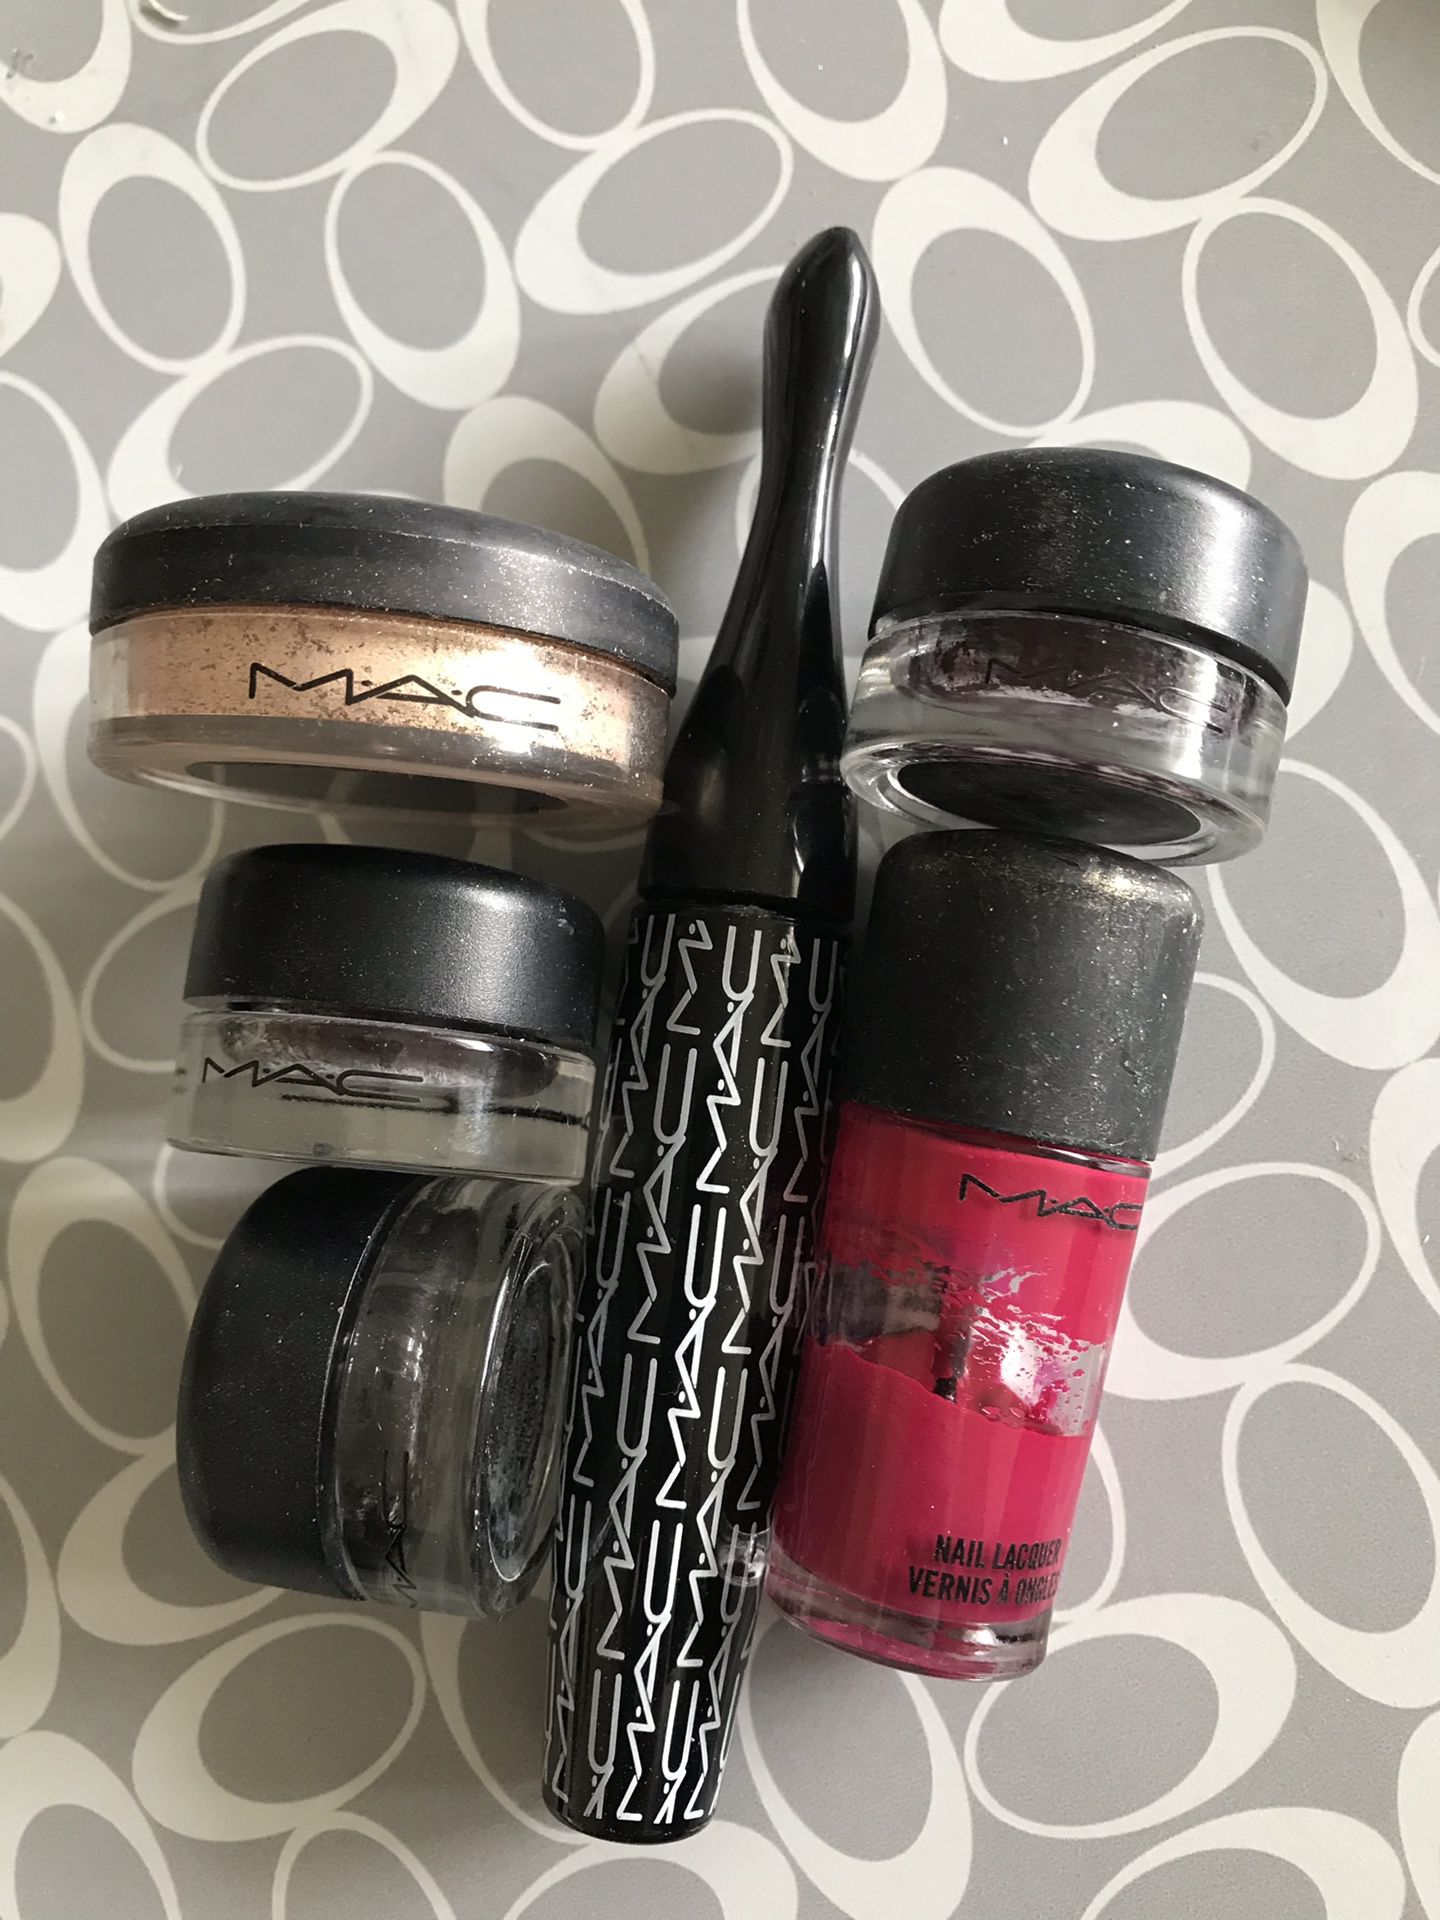 6 empty trade-in MAC containers